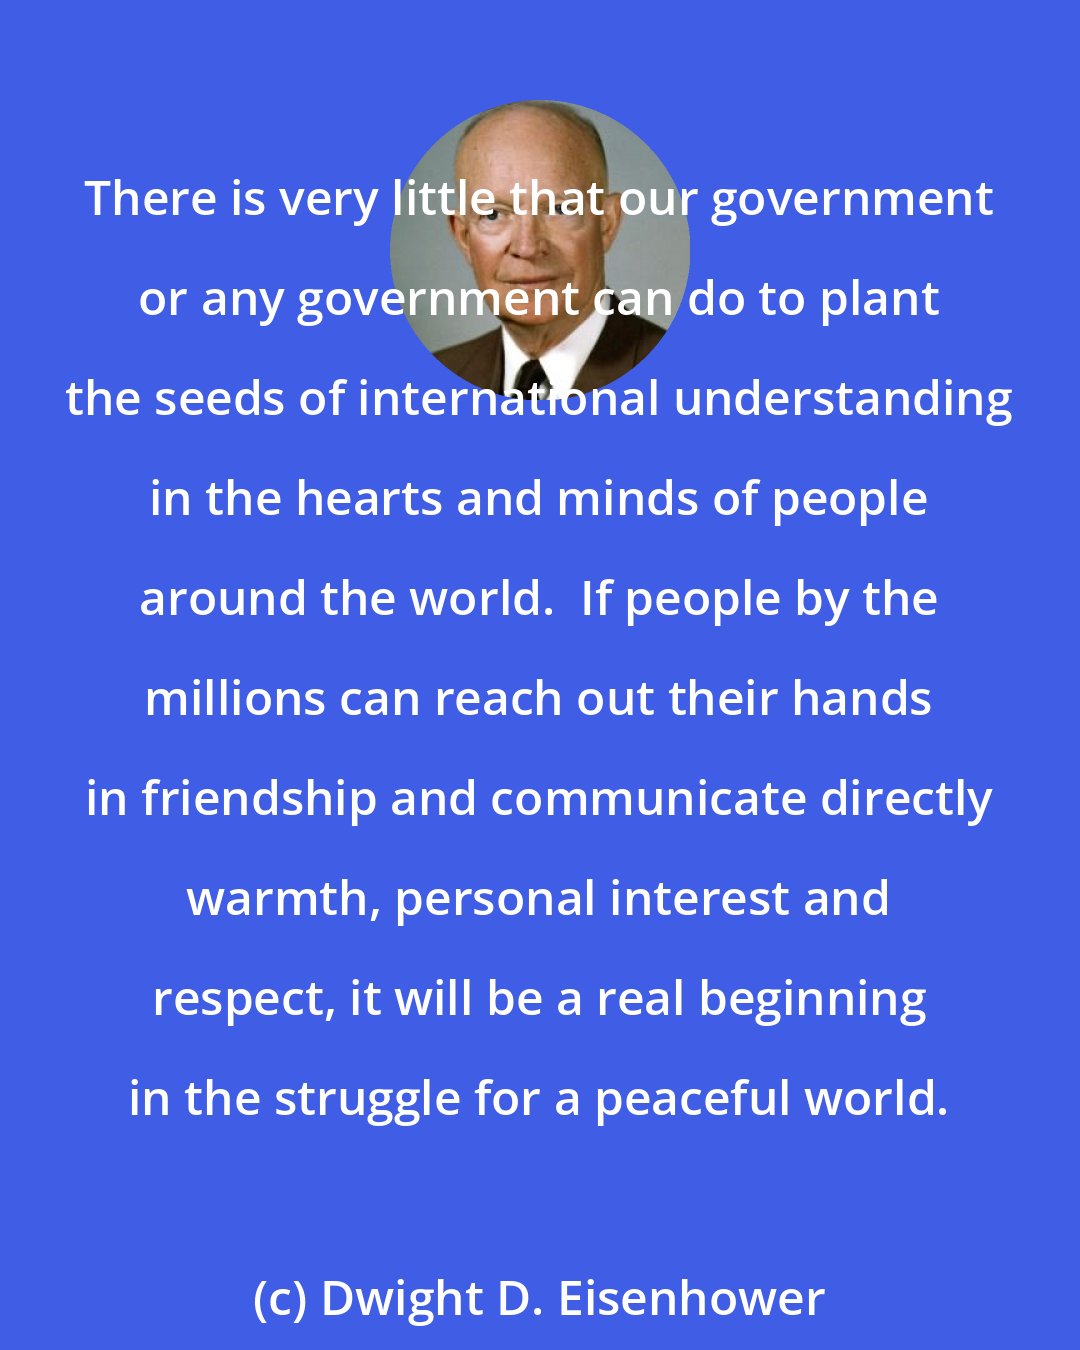 Dwight D. Eisenhower: There is very little that our government or any government can do to plant the seeds of international understanding in the hearts and minds of people around the world.  If people by the millions can reach out their hands in friendship and communicate directly warmth, personal interest and respect, it will be a real beginning in the struggle for a peaceful world.